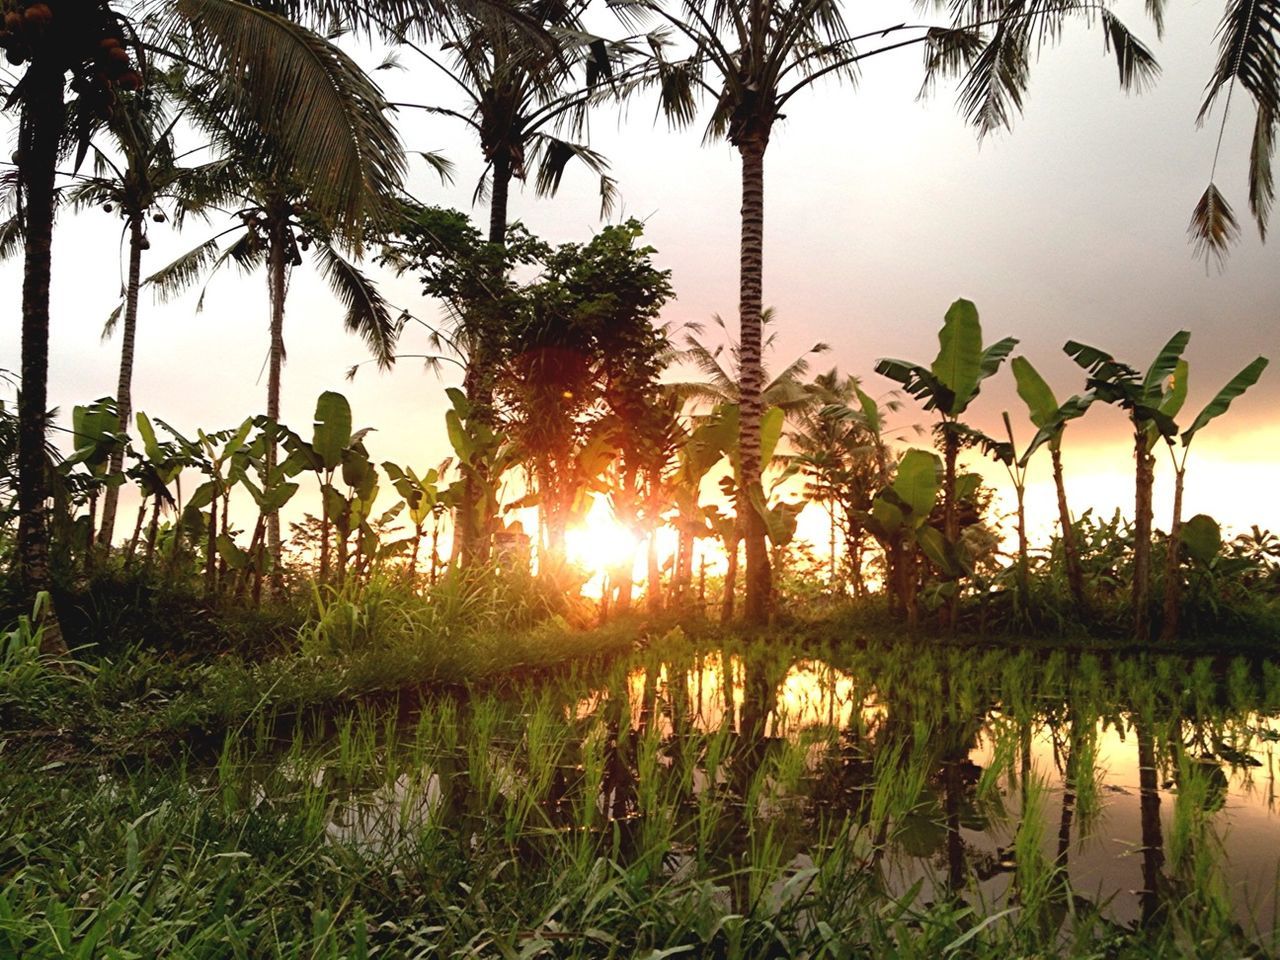 Trees by paddy fields during sunset